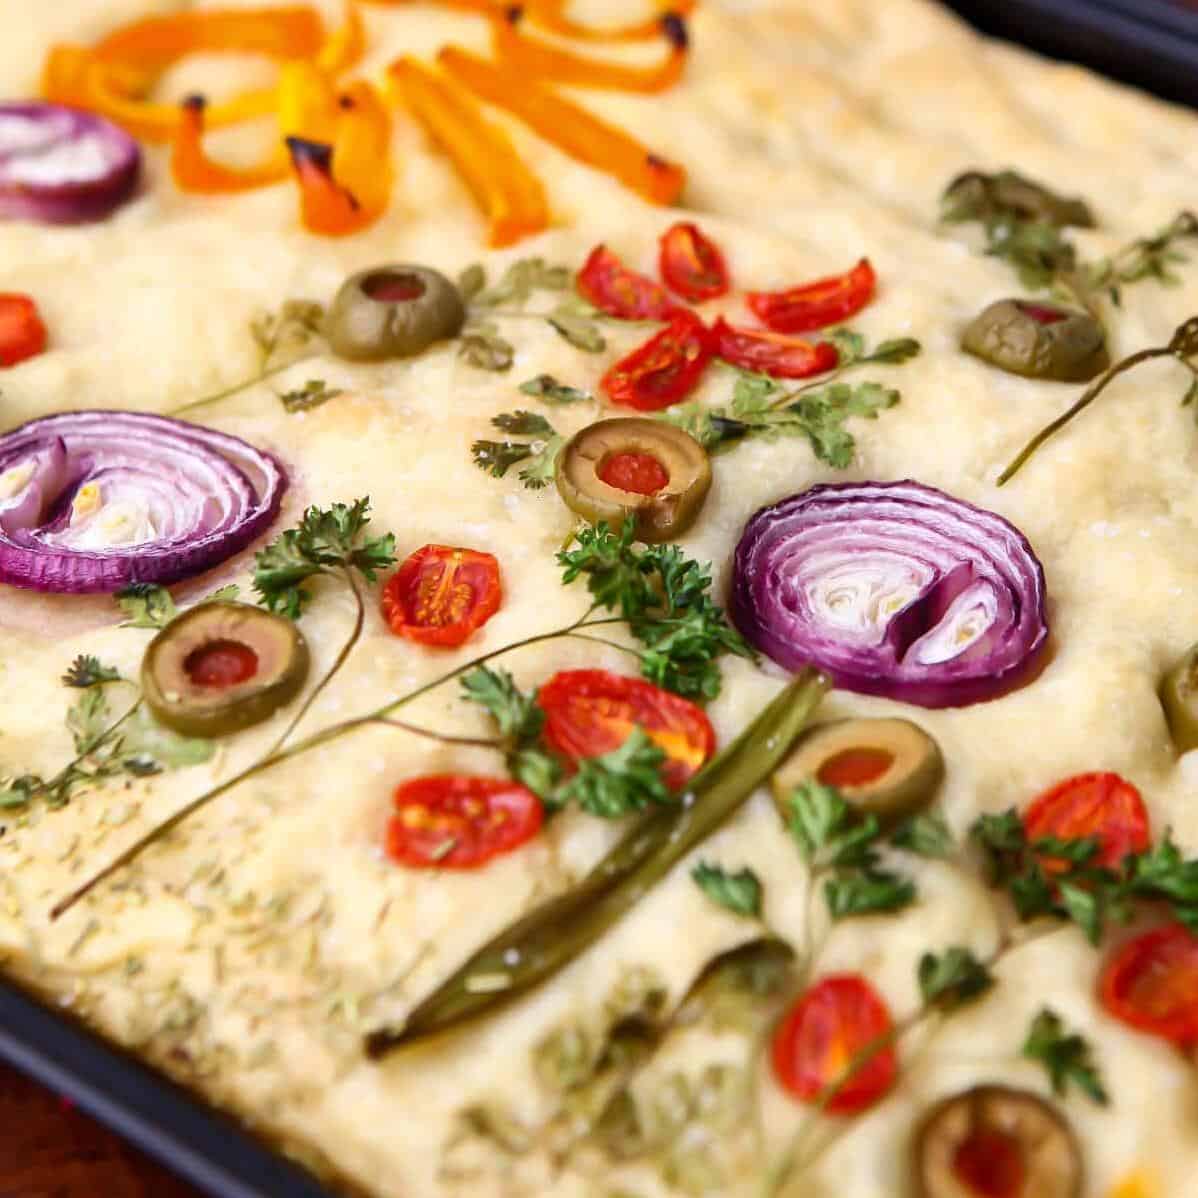  Feast your eyes on our perfectly baked vegan focaccia.